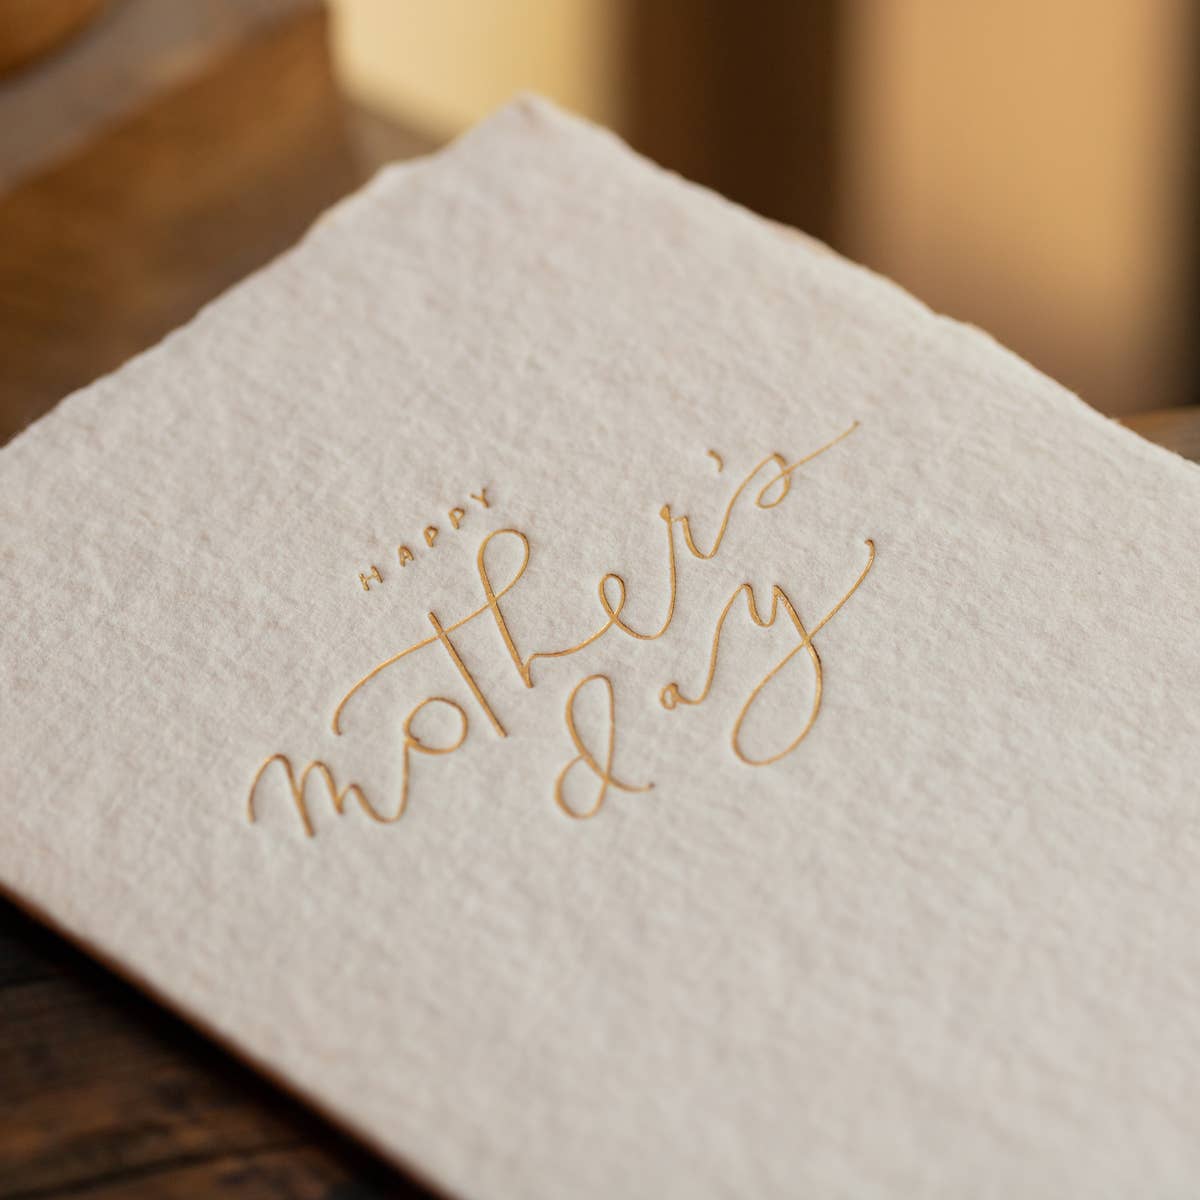 Mother's Day Calligraphy Note Handmade Paper Letterpress